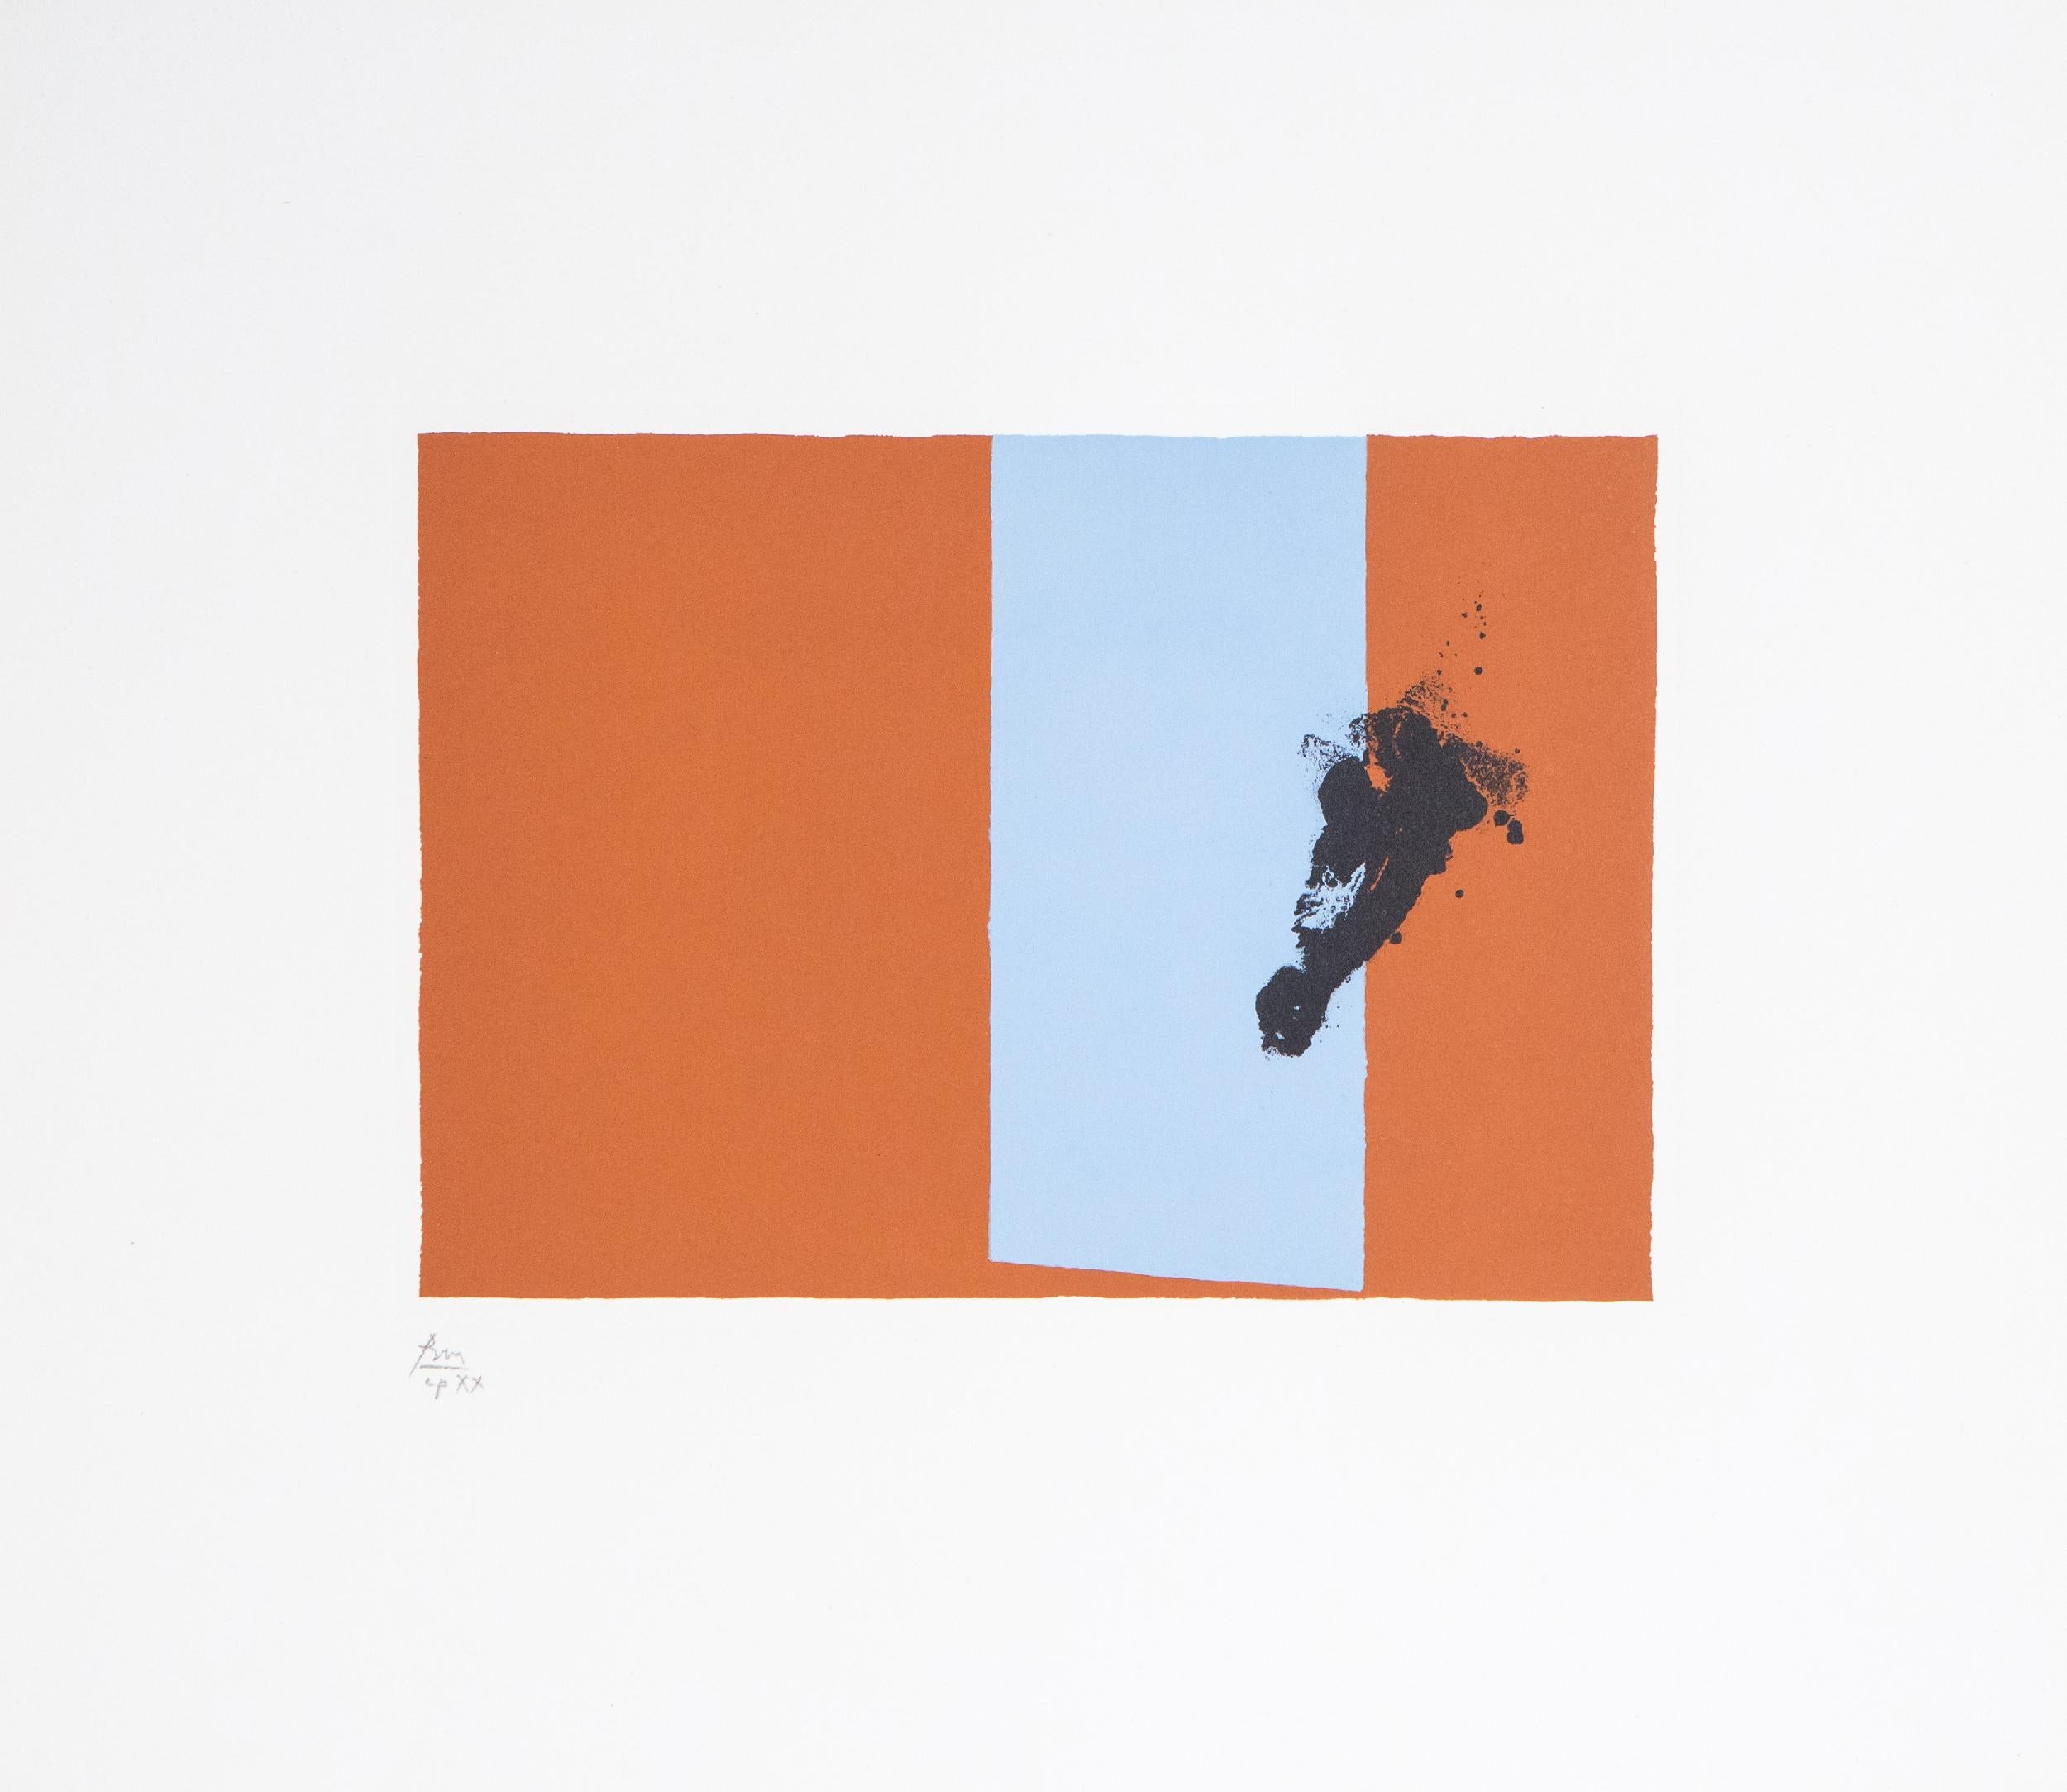 Robert Motherwell (1915-1991) is one of the essential American abstract painters that radically defined post-war abstraction in New York City.

Today, his work appears in museum collections around the world and is instantly recognizable for its